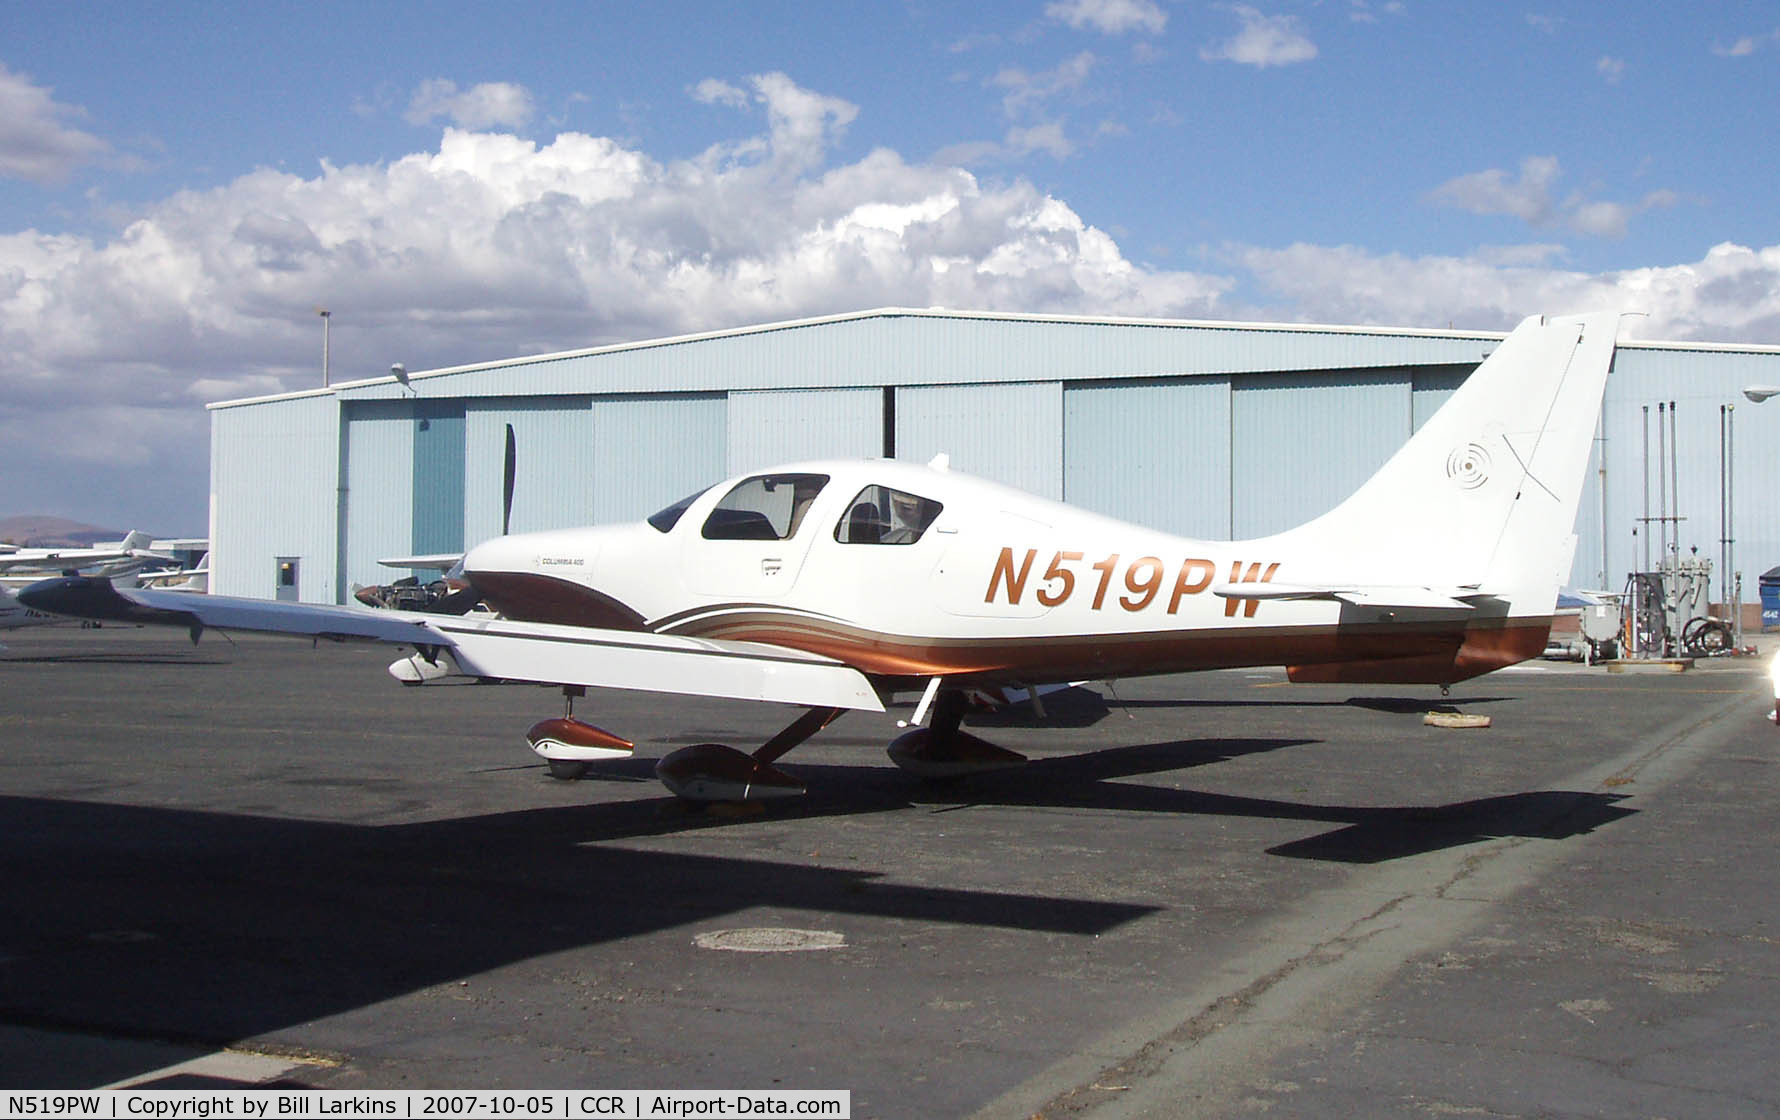 N519PW, 2006 Columbia Aircraft Mfg LC41-550FG C/N 41610, Visitor from Arizona